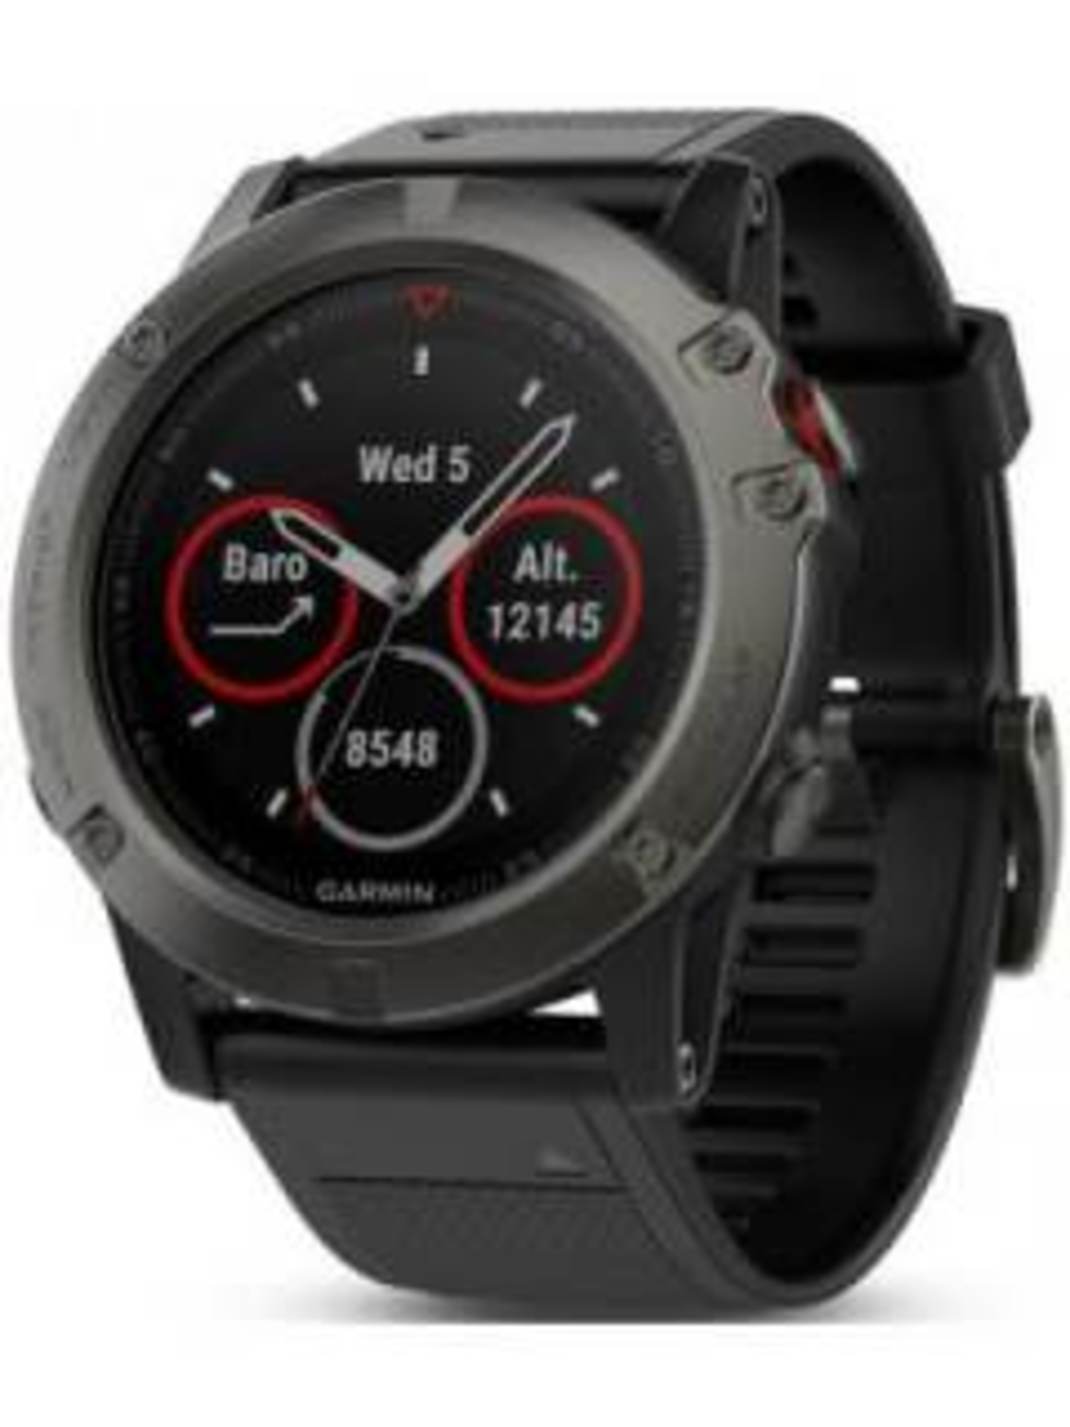 Compare Garmin Fenix 5S vs Samsung Galaxy Watch Active - Garmin Fenix 5S vs Samsung Galaxy Watch Active Comparison by Price, Specifications, Reviews &amp; Features | Now